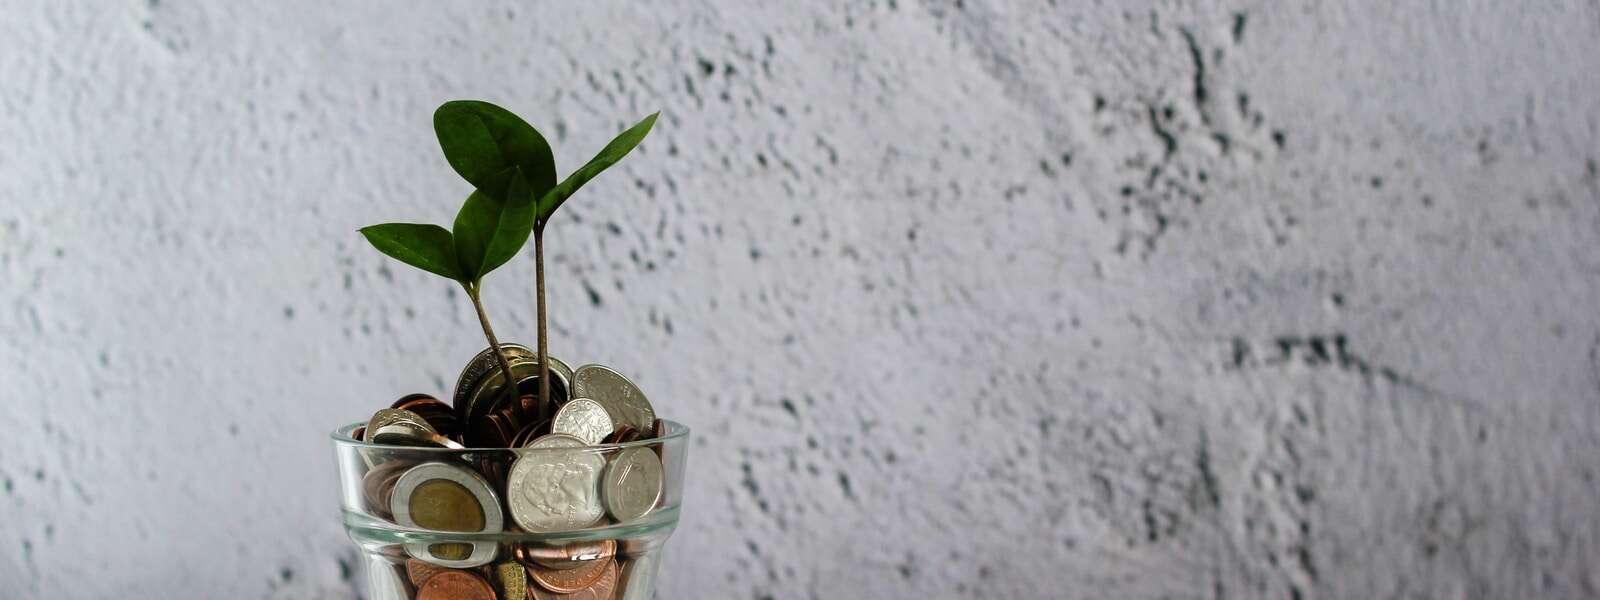 A fake plant is potted in a glass filled with coins.